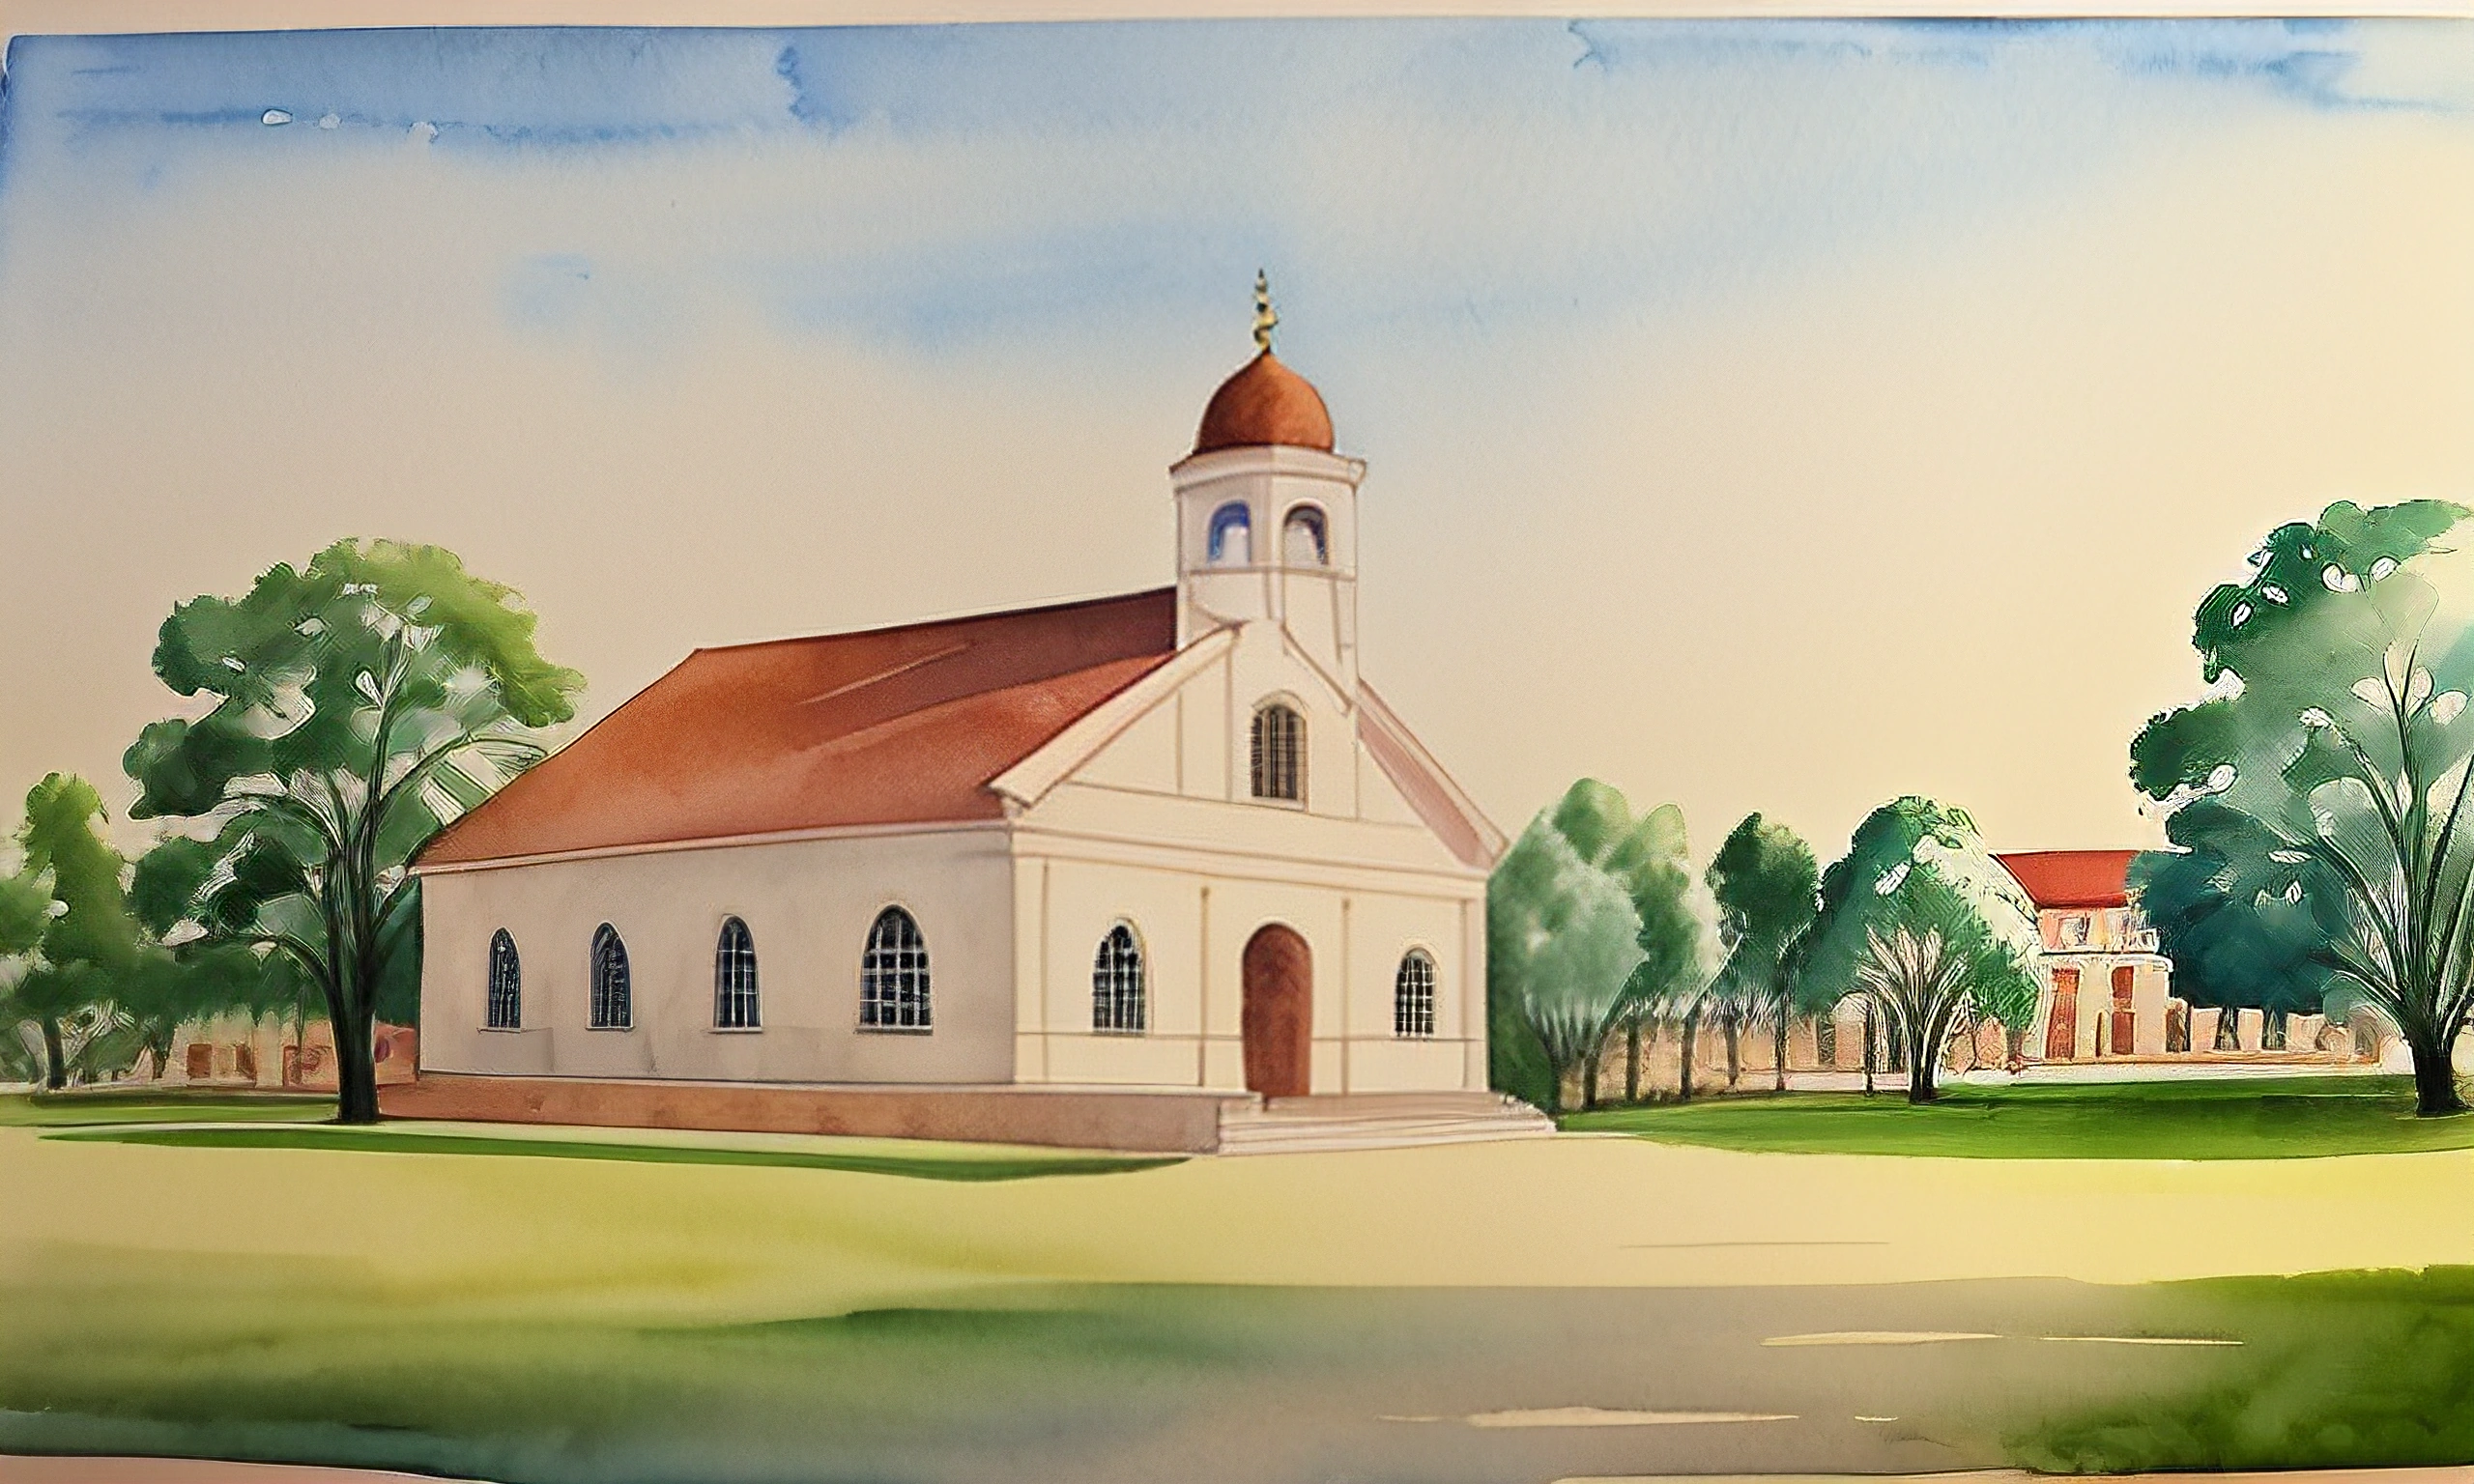 painting of a church with a steeple and a steeple on the top